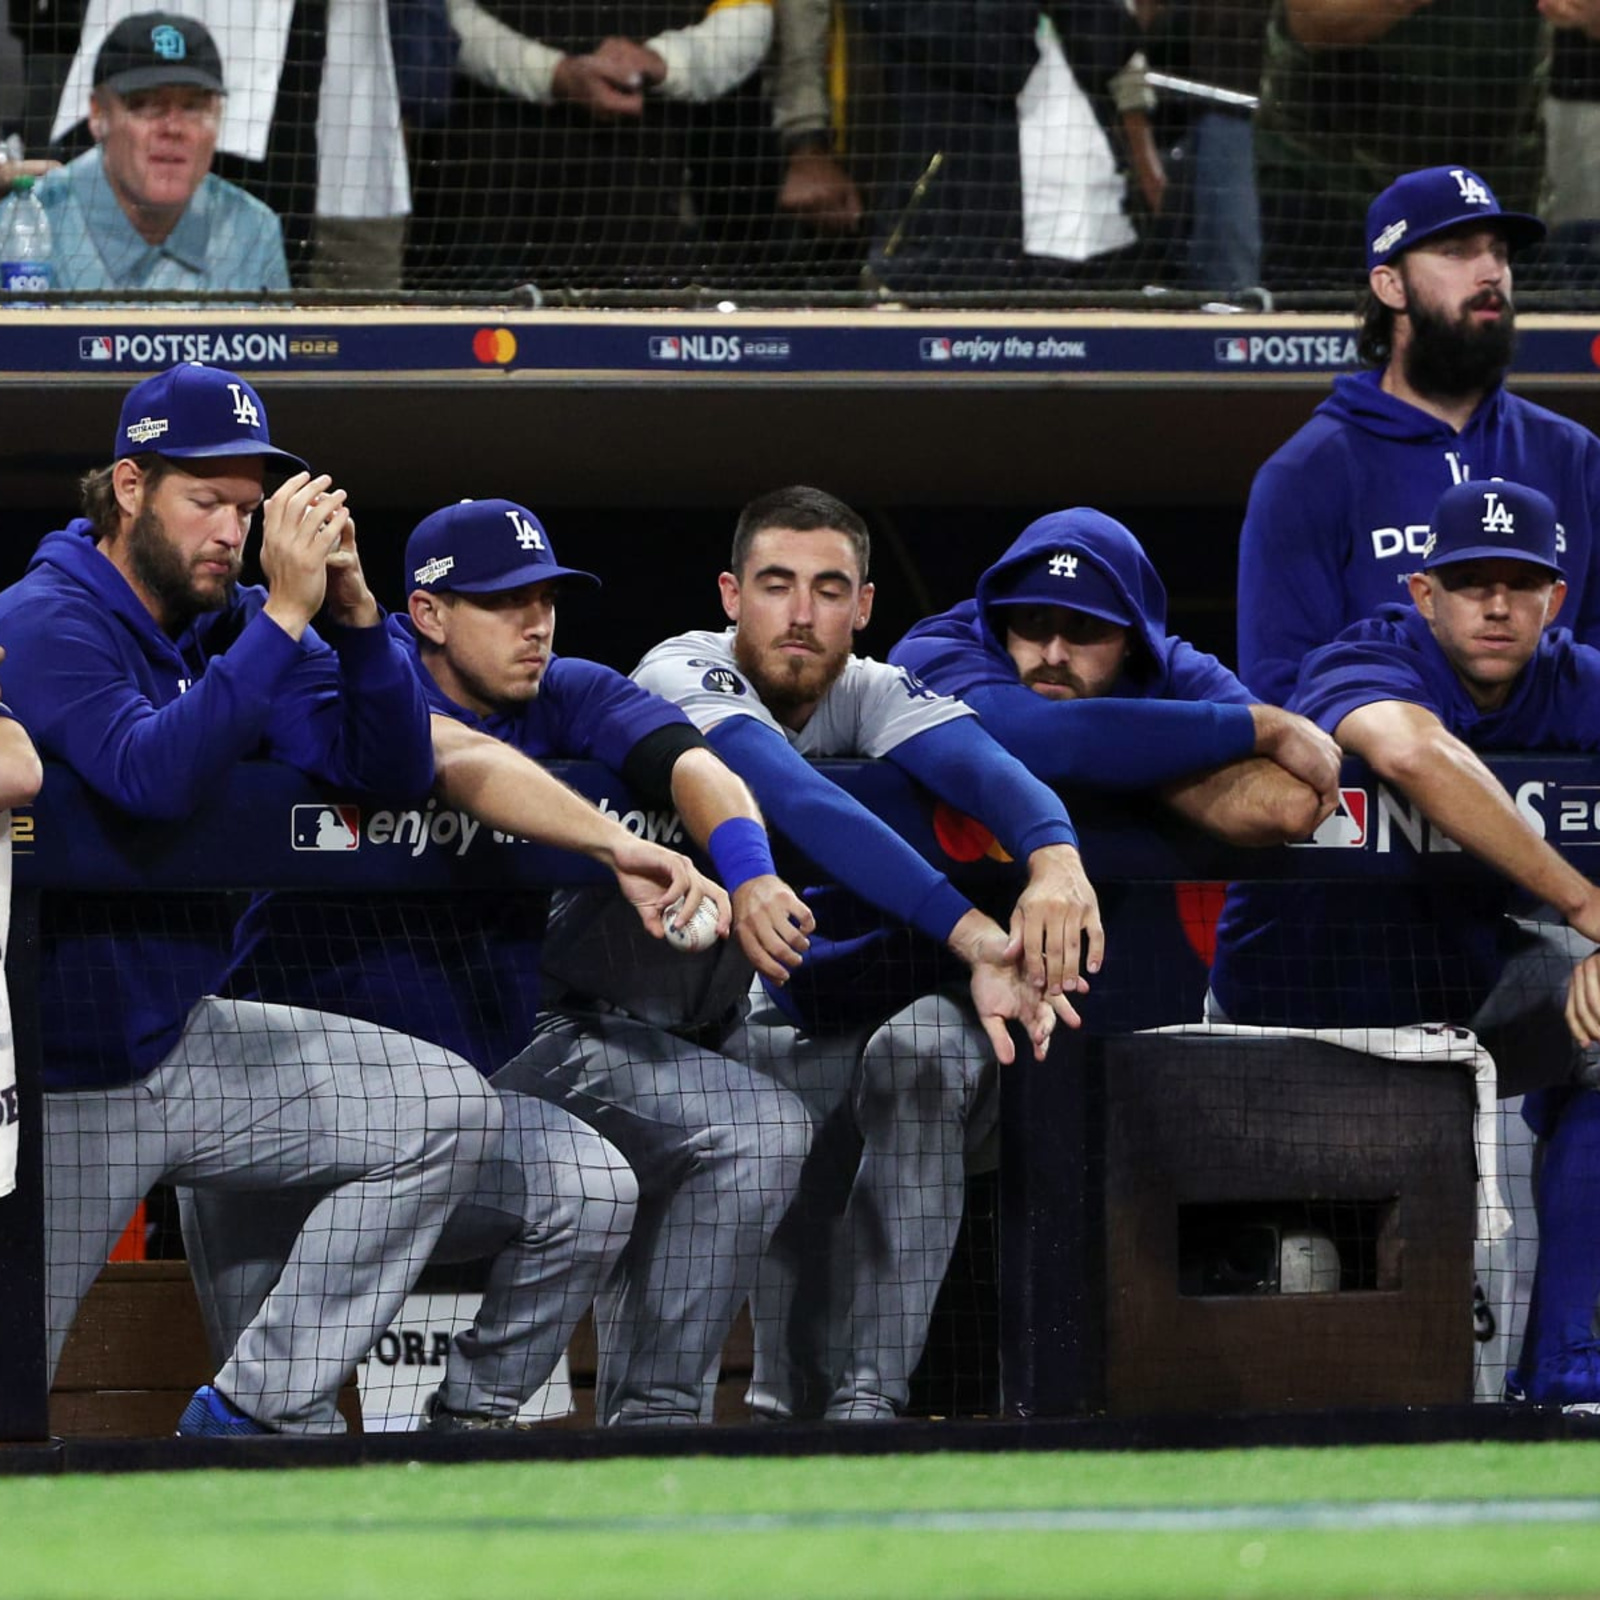 Column: Dodgers lose, spoiled fans want playoff format changed